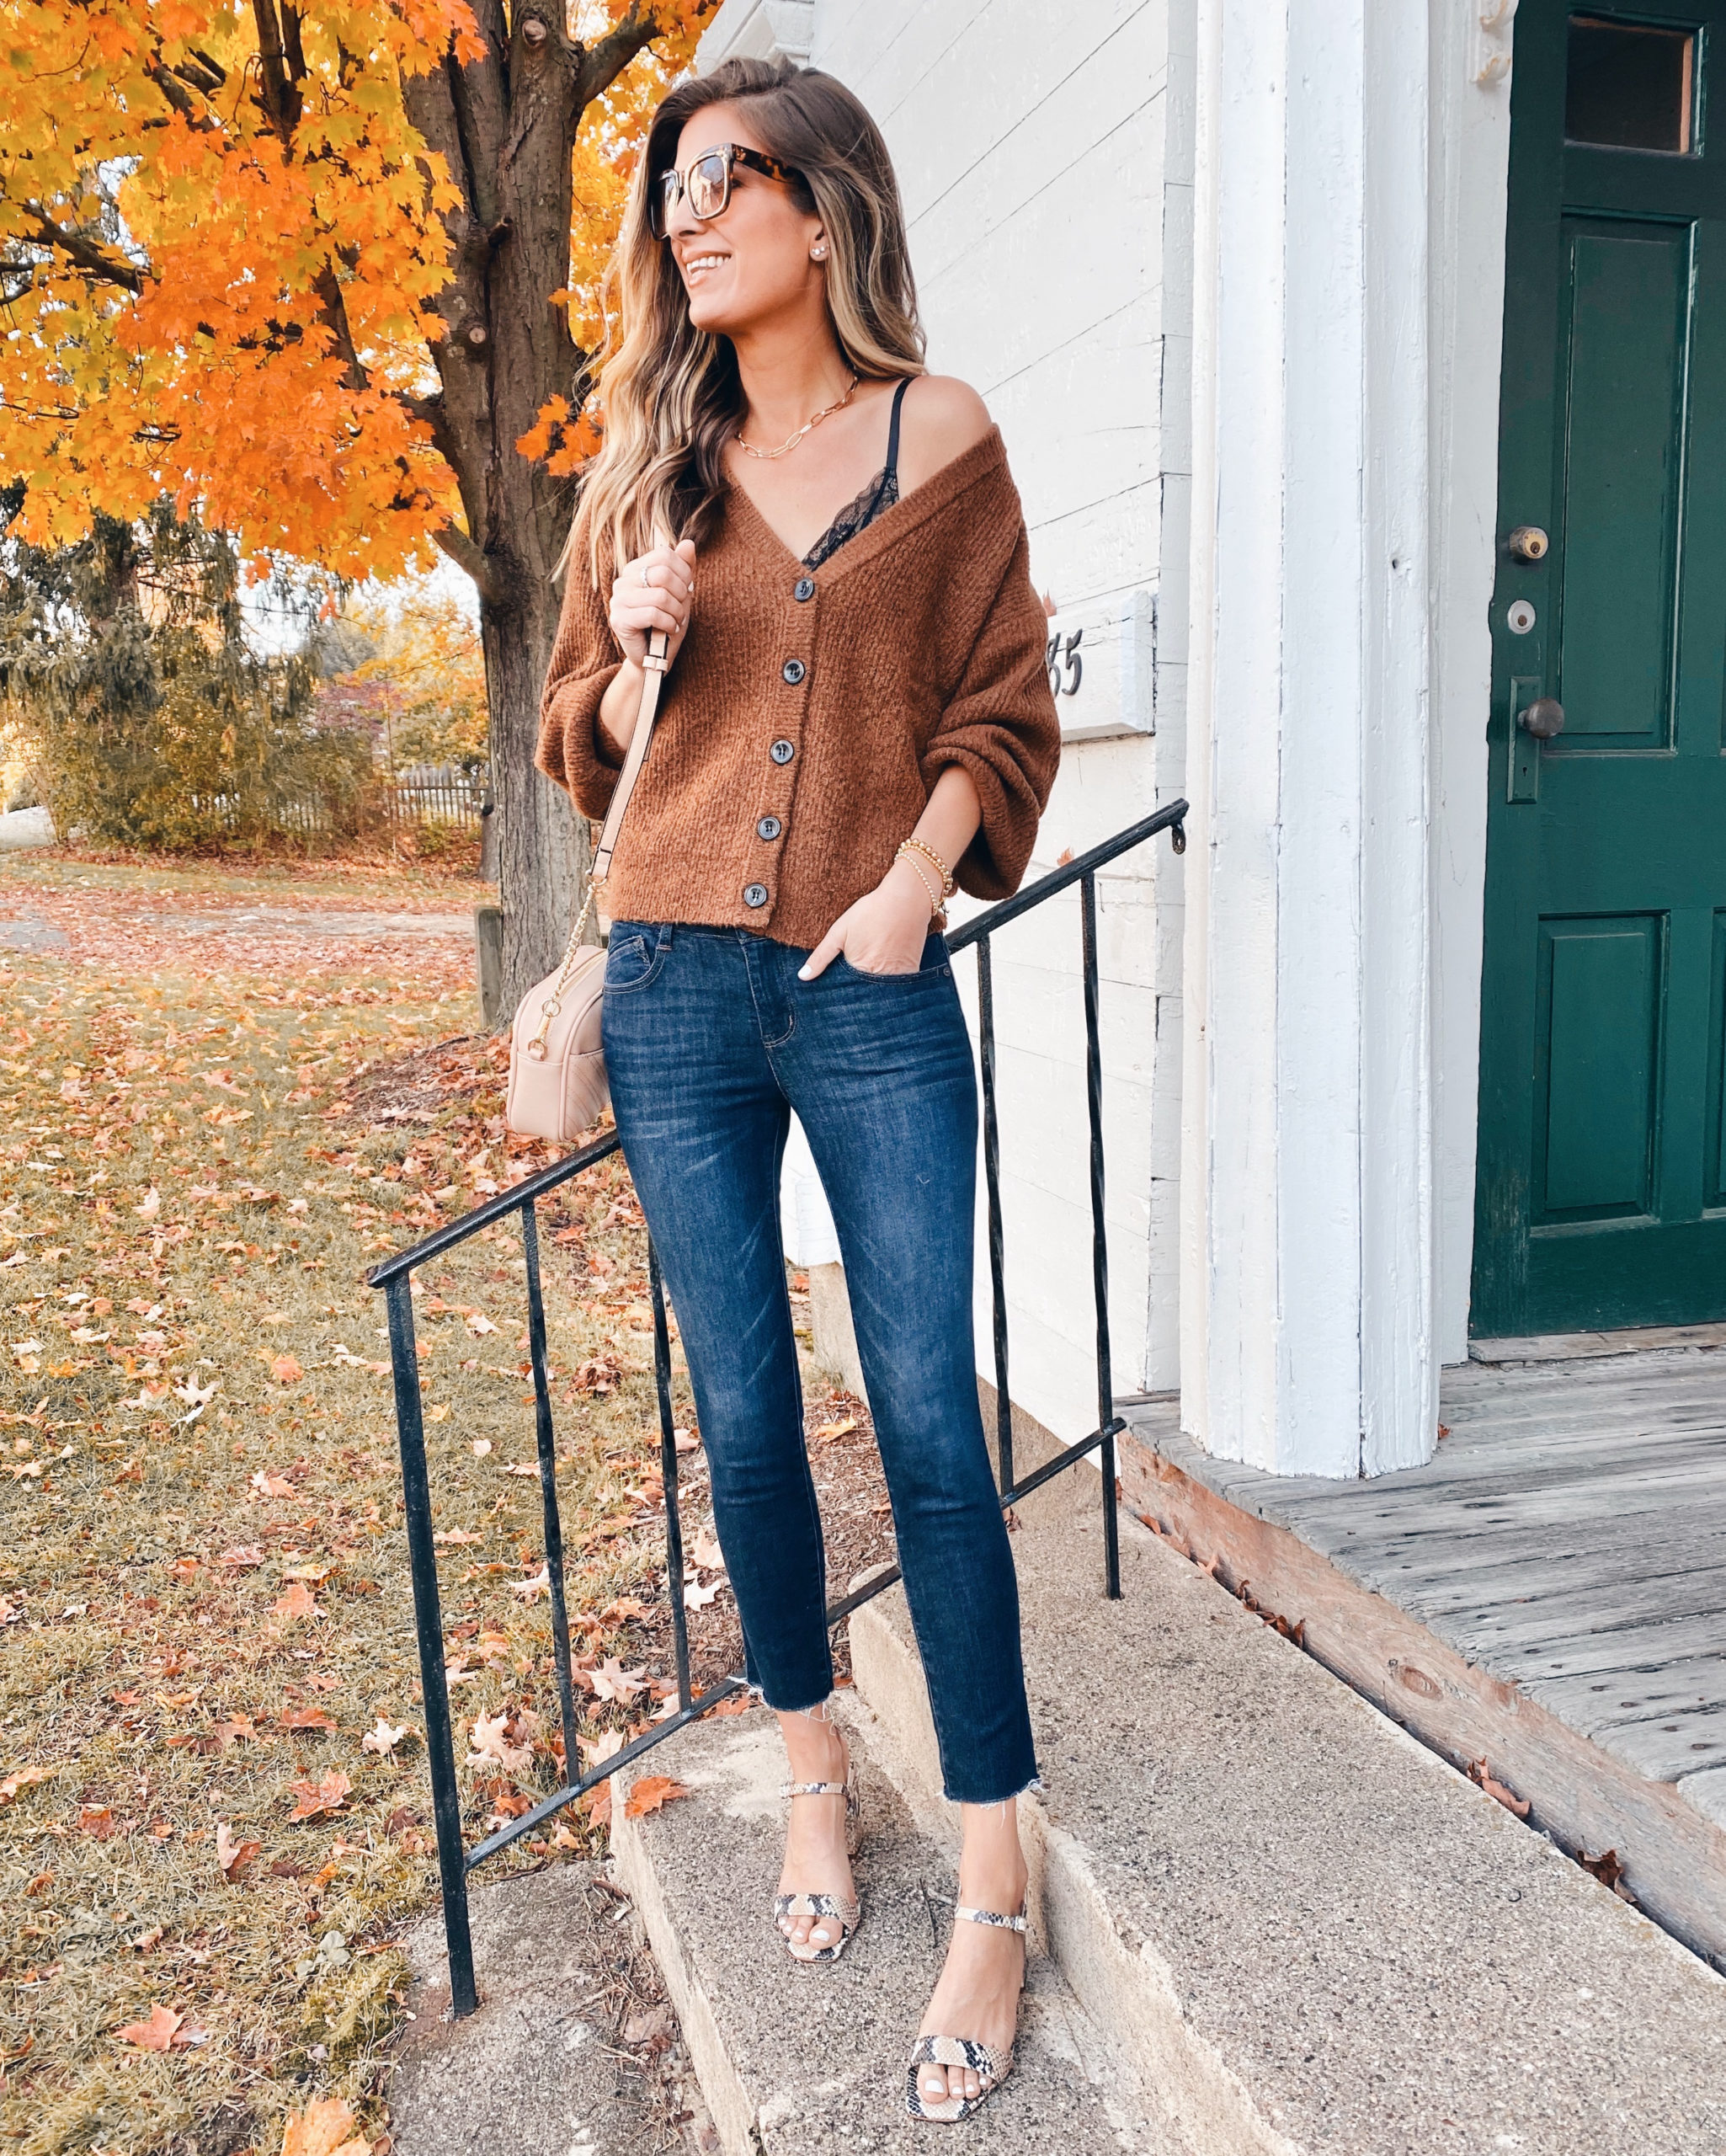 3 Ways to Style 1 Cardigan - Fall Outfits 2020 - Pinteresting Plans